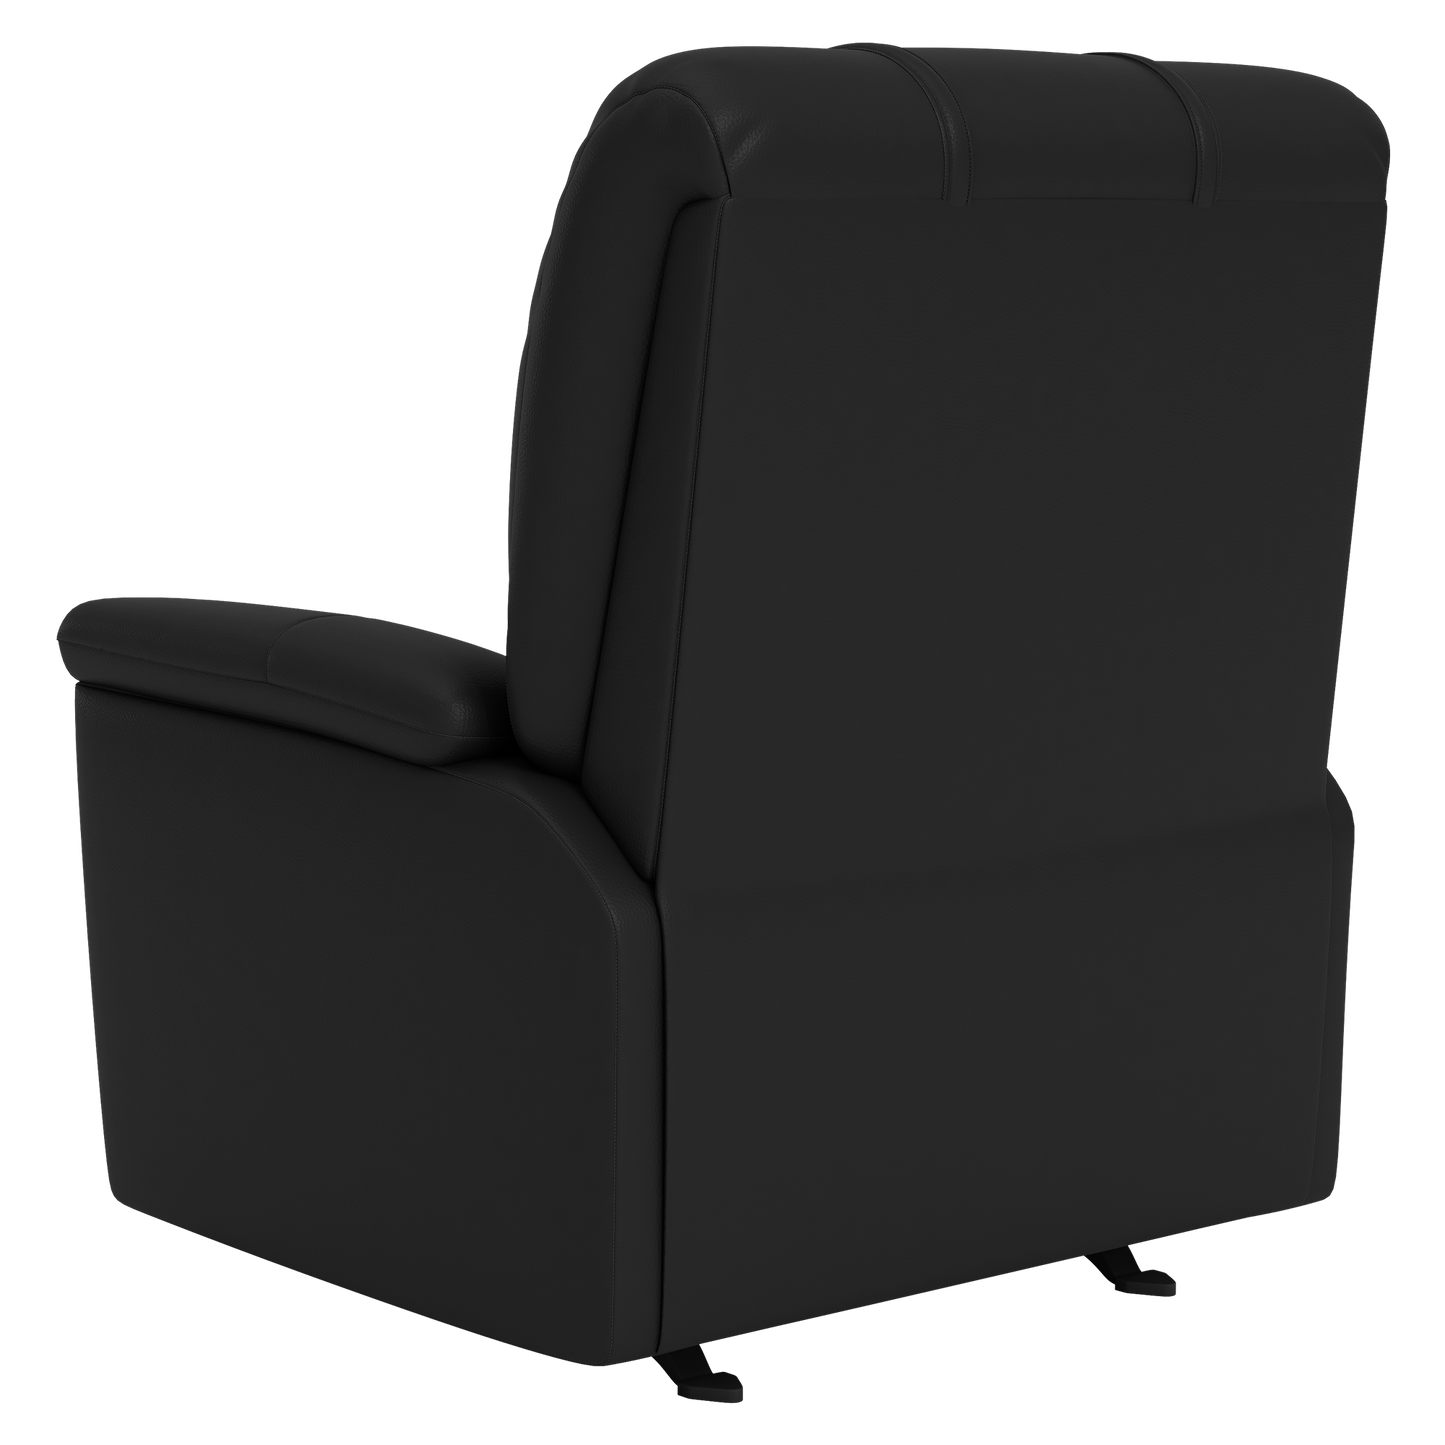 Freedom Rocker Recliner with Central Michigan Secondary